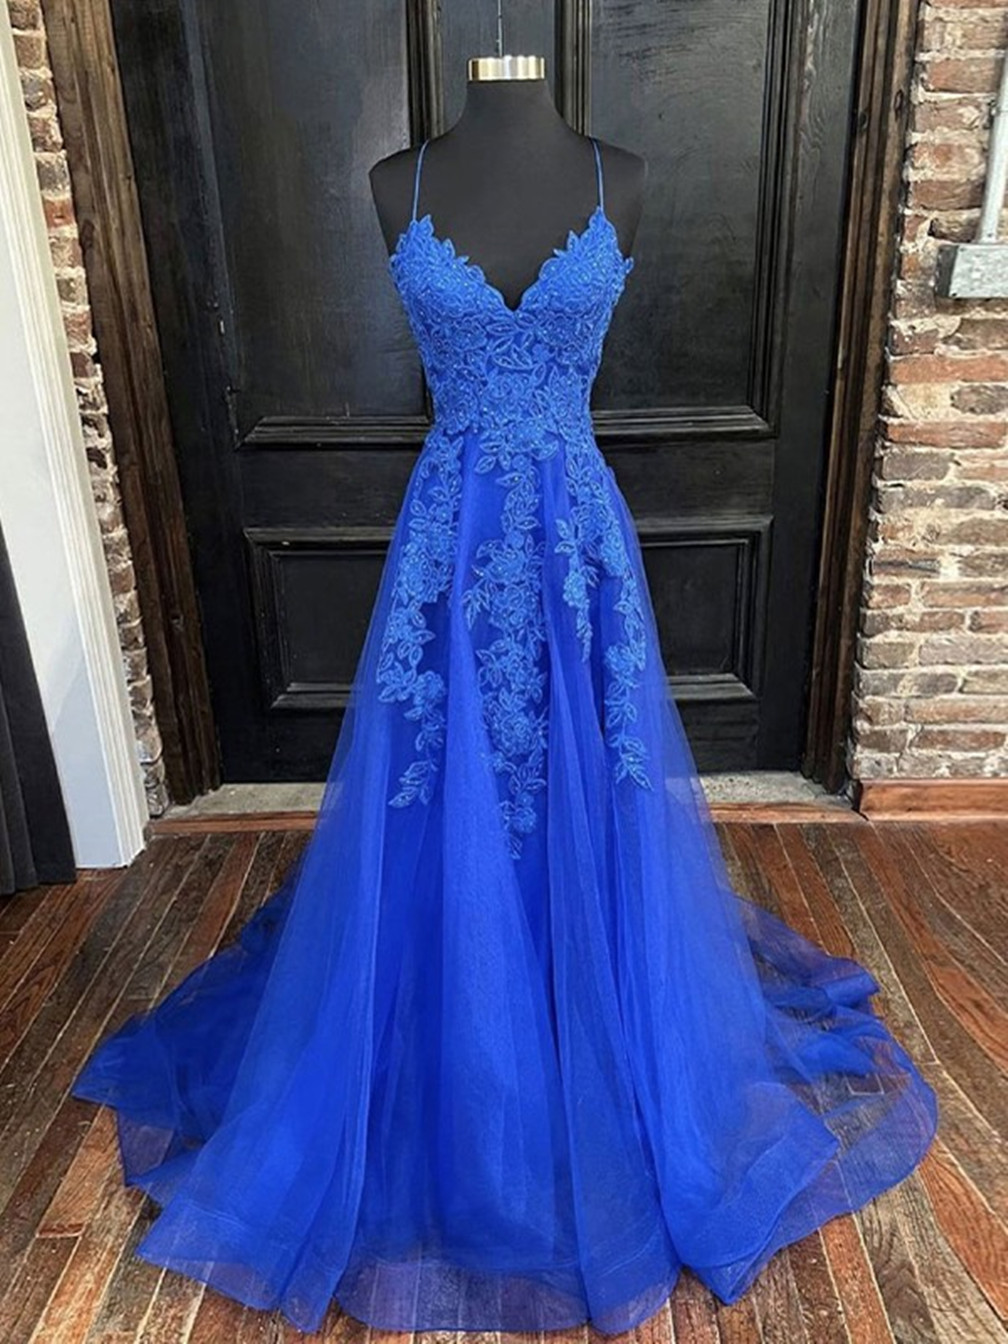 Women Tulle Applique Prom Dresses Long A-line/princess Lace Evening Party Gowns Sleeveless Formal Dress Yp075